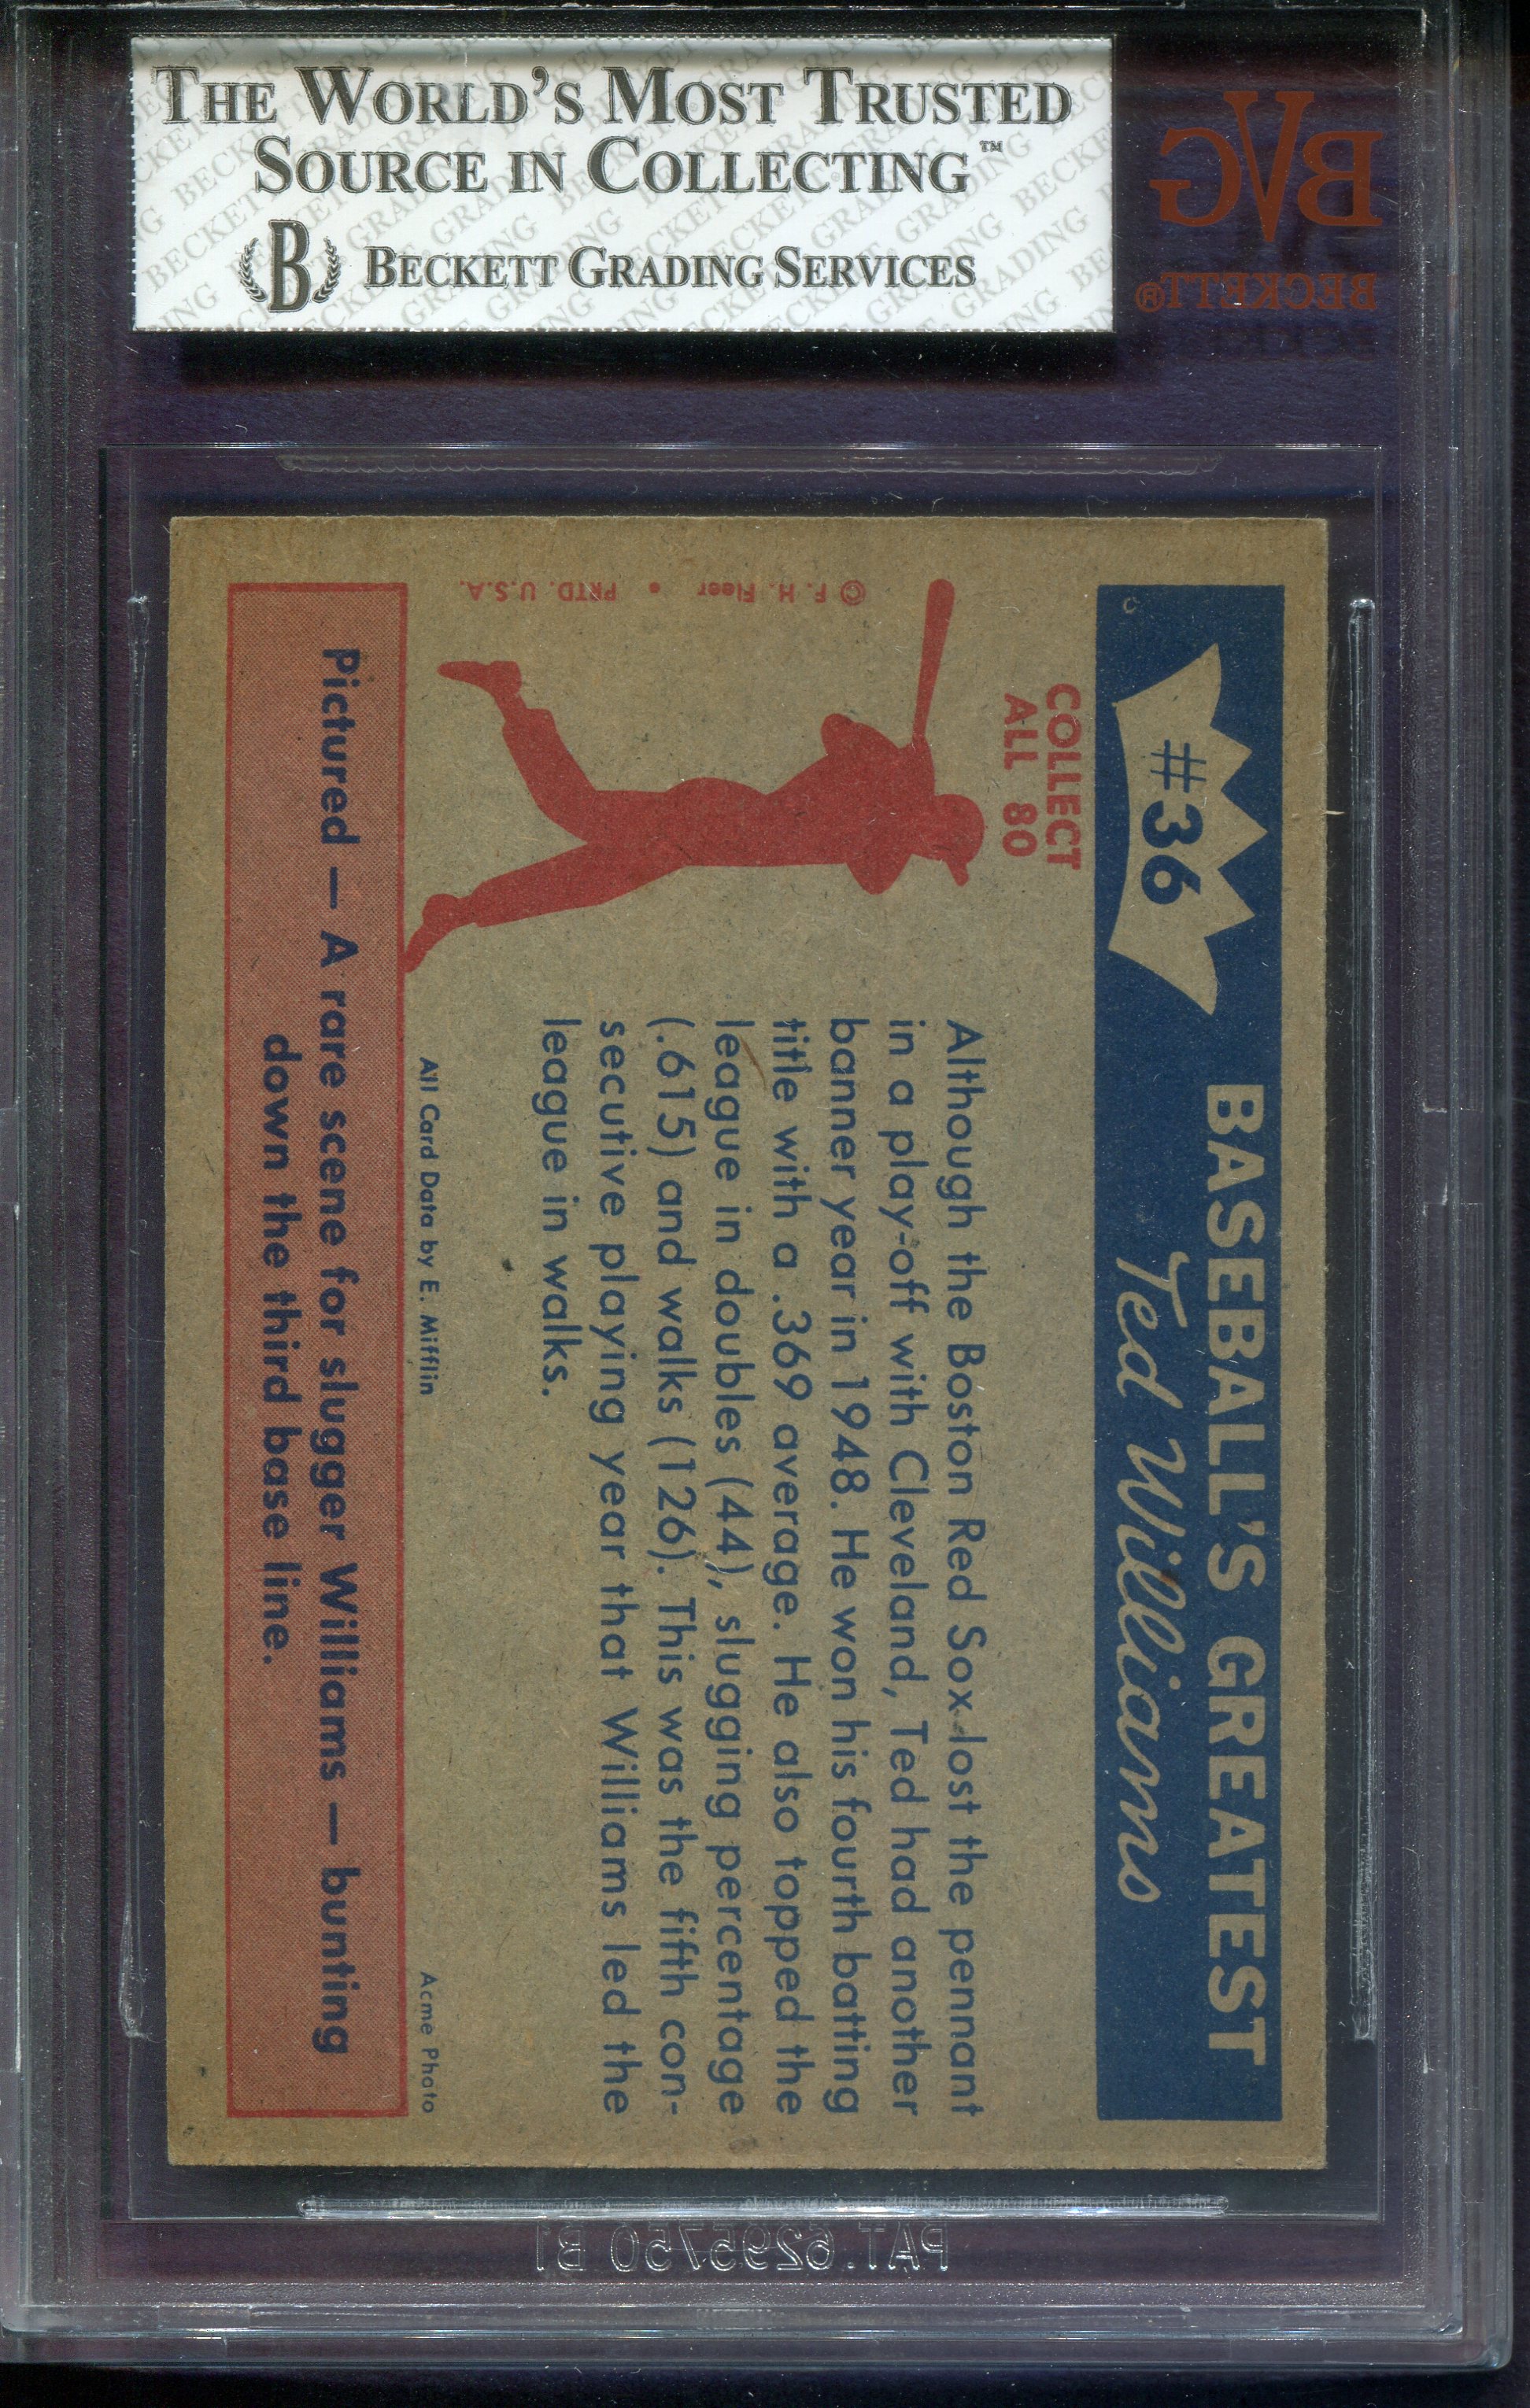 1959 Fleer Ted Williams #36 Banner Year for Ted back image